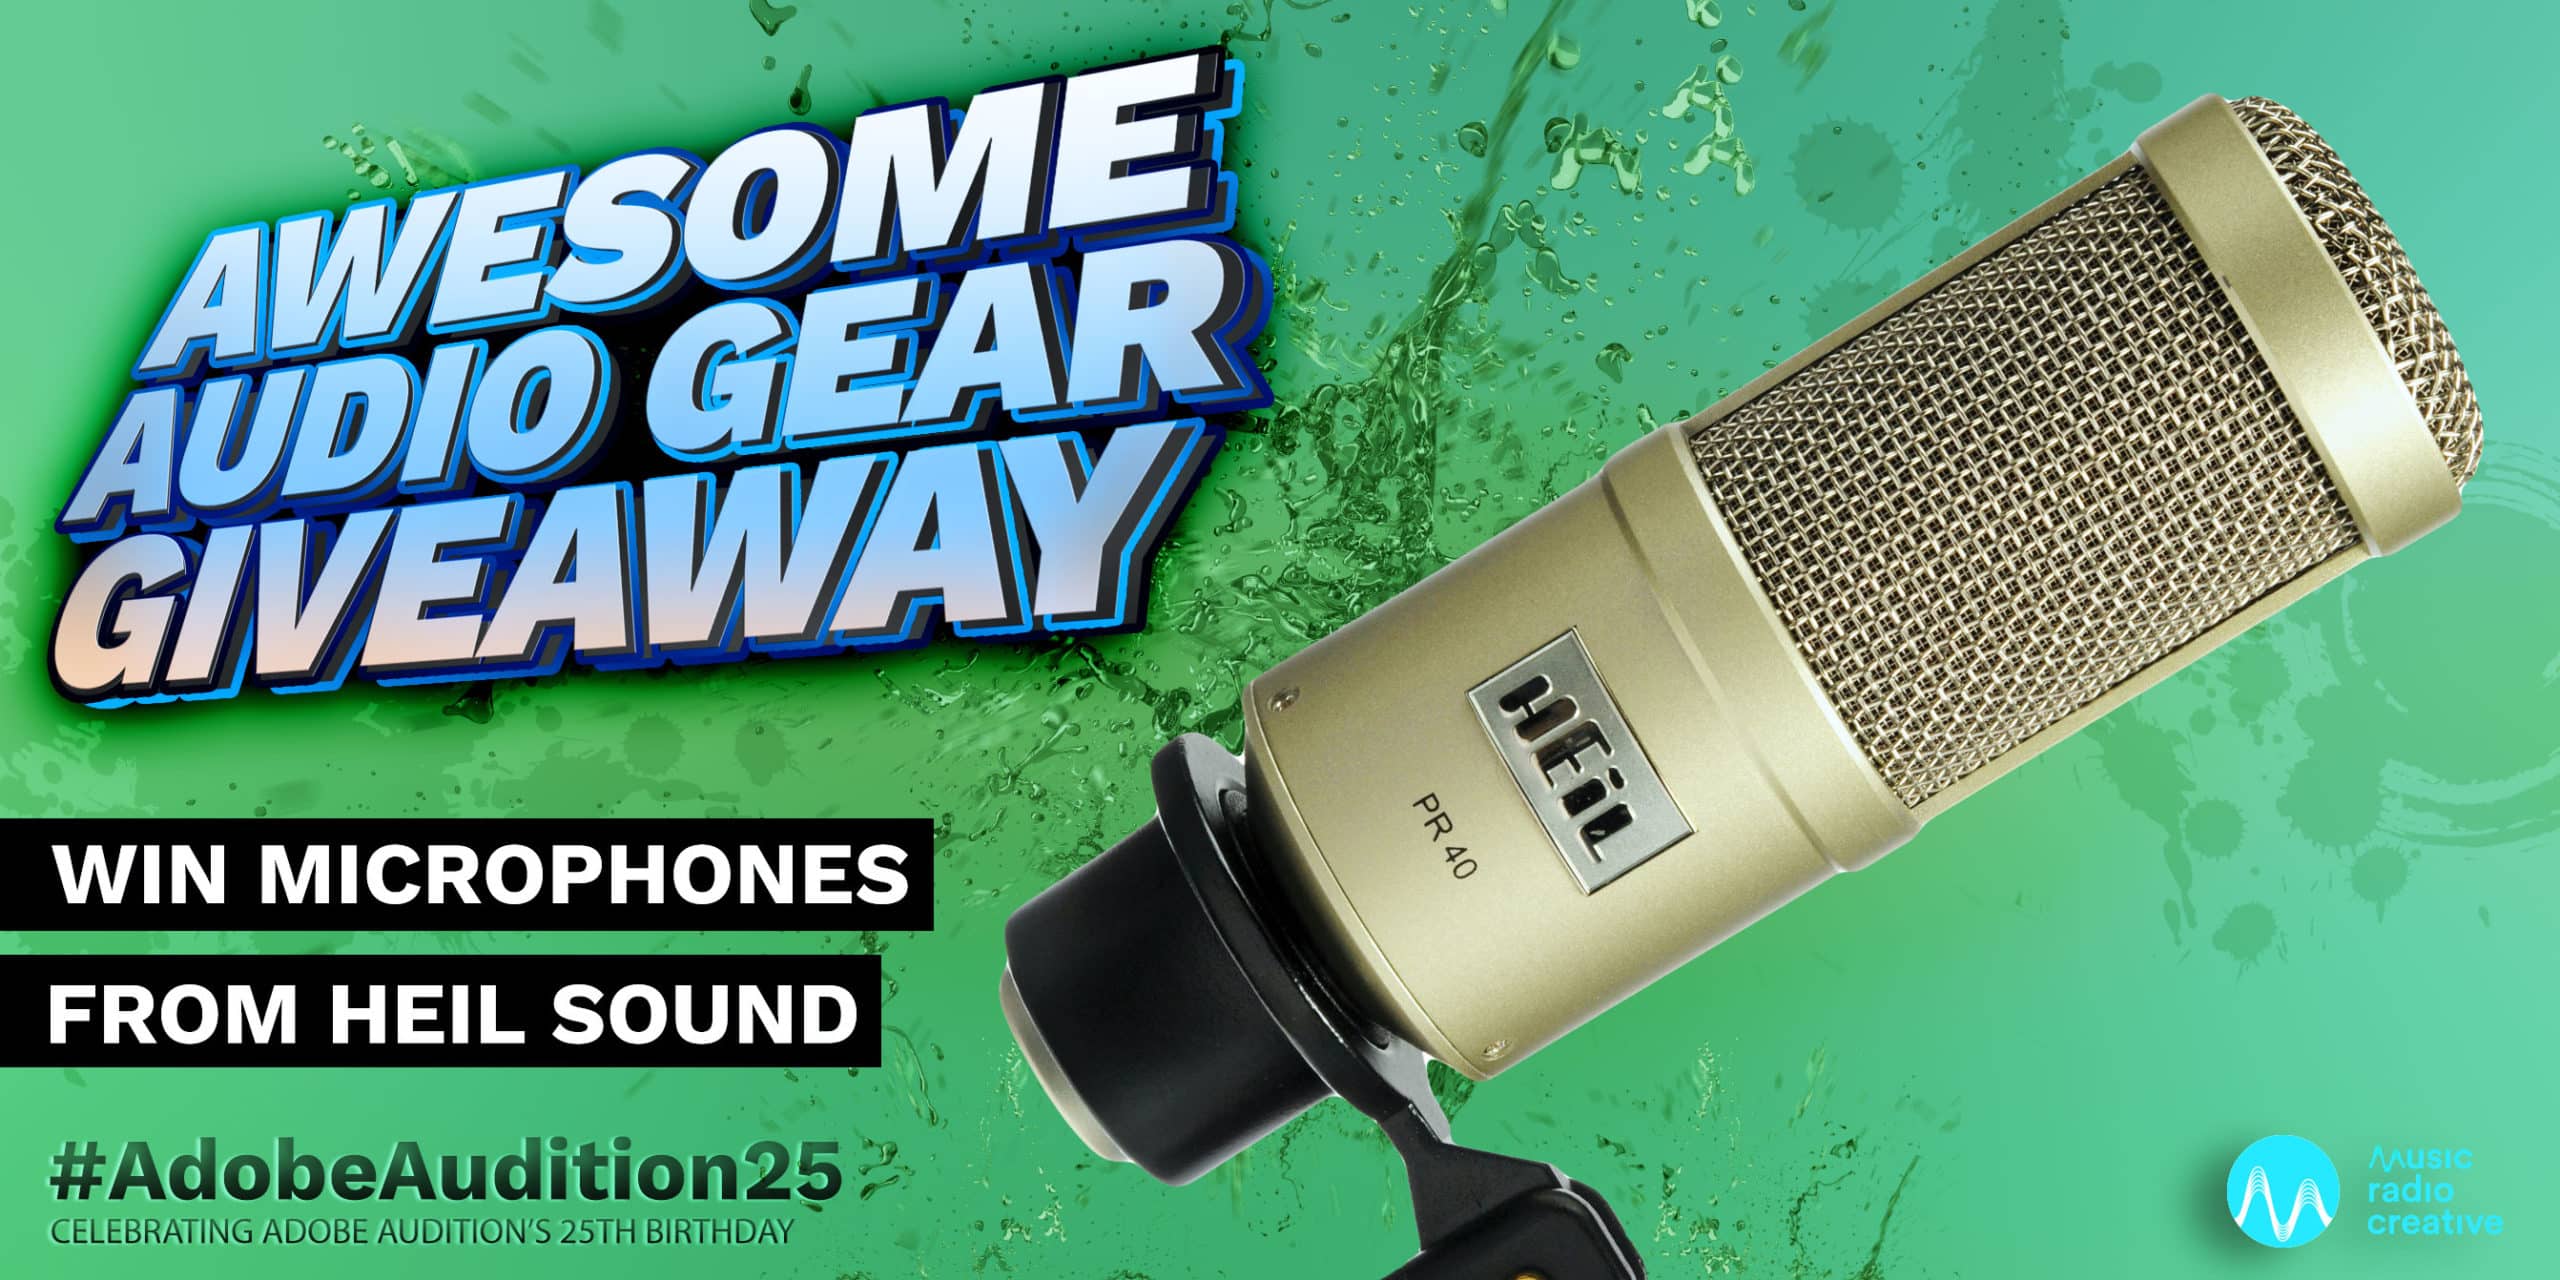 Win Microphones from Heil Sound Awesome Audio Gear Giveaway  Music Radio Creative